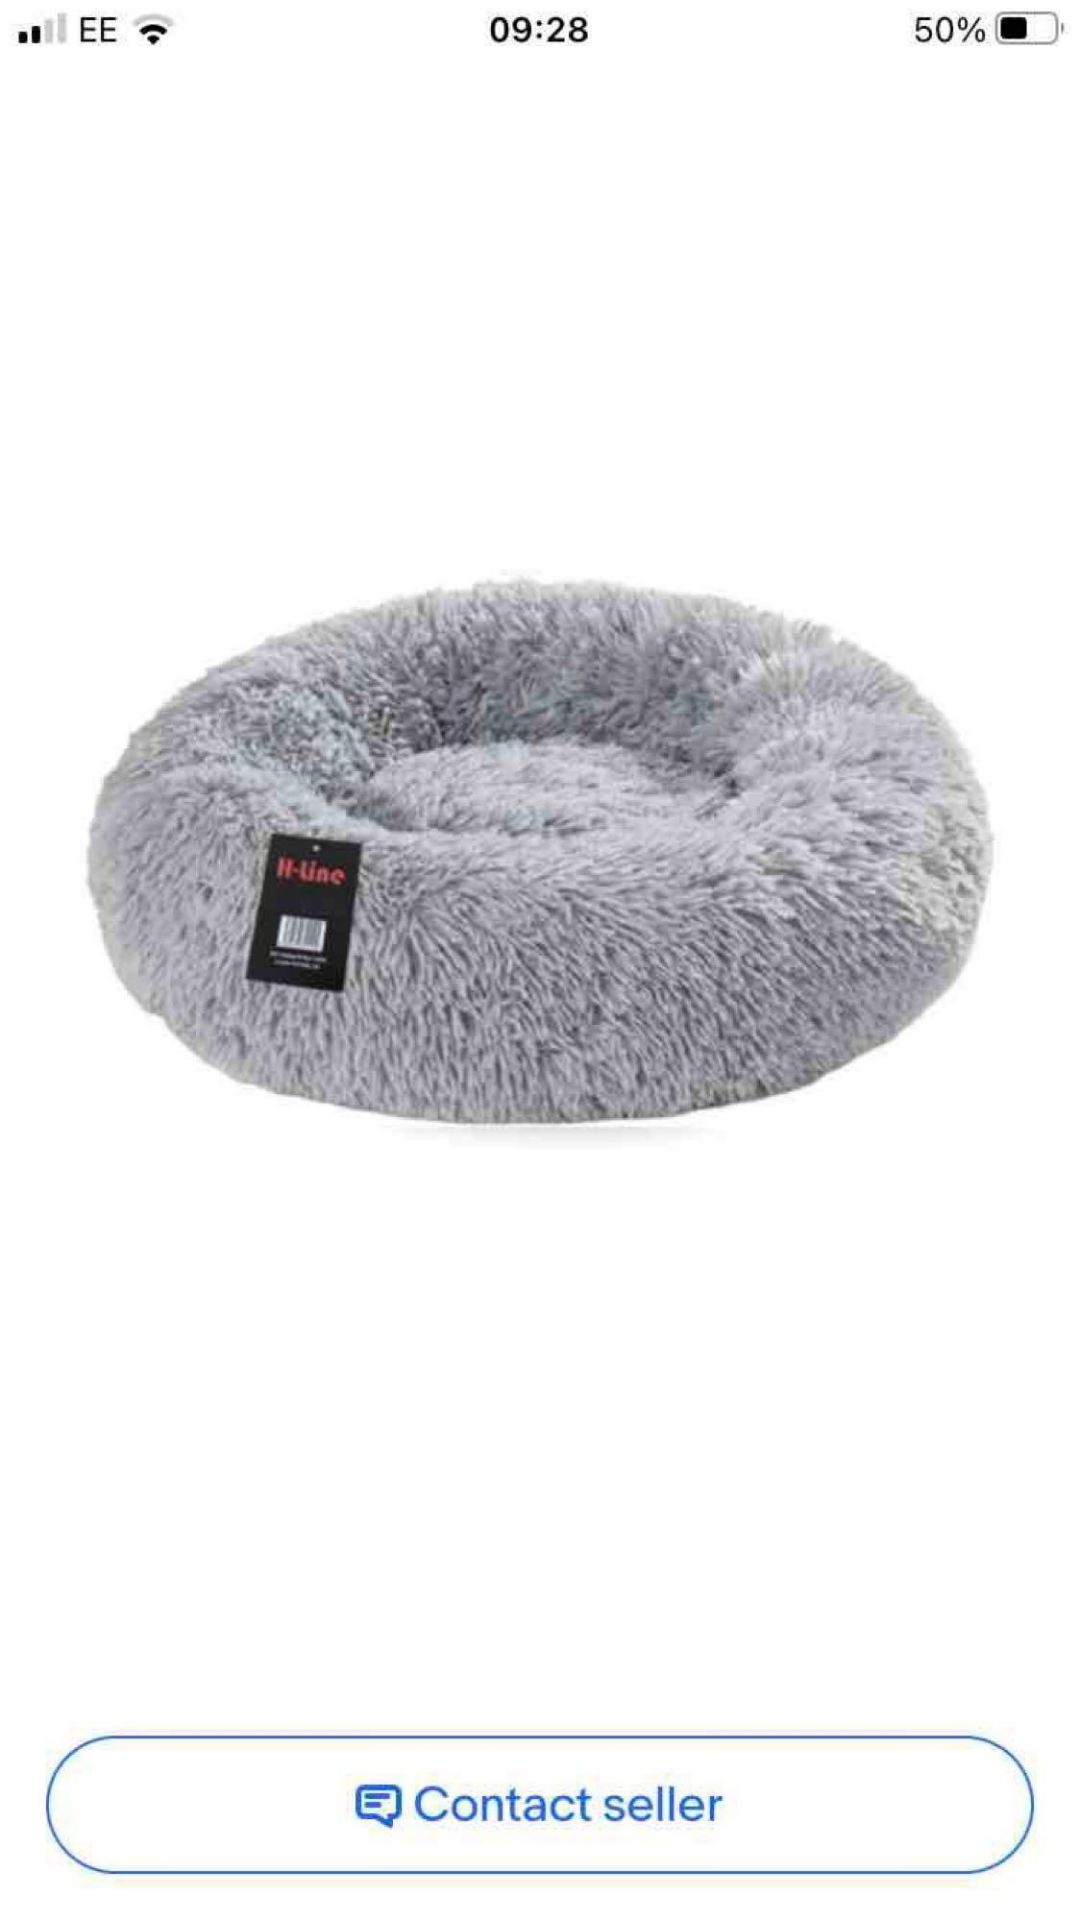 boxed feandrea dog bed RRP £29.99